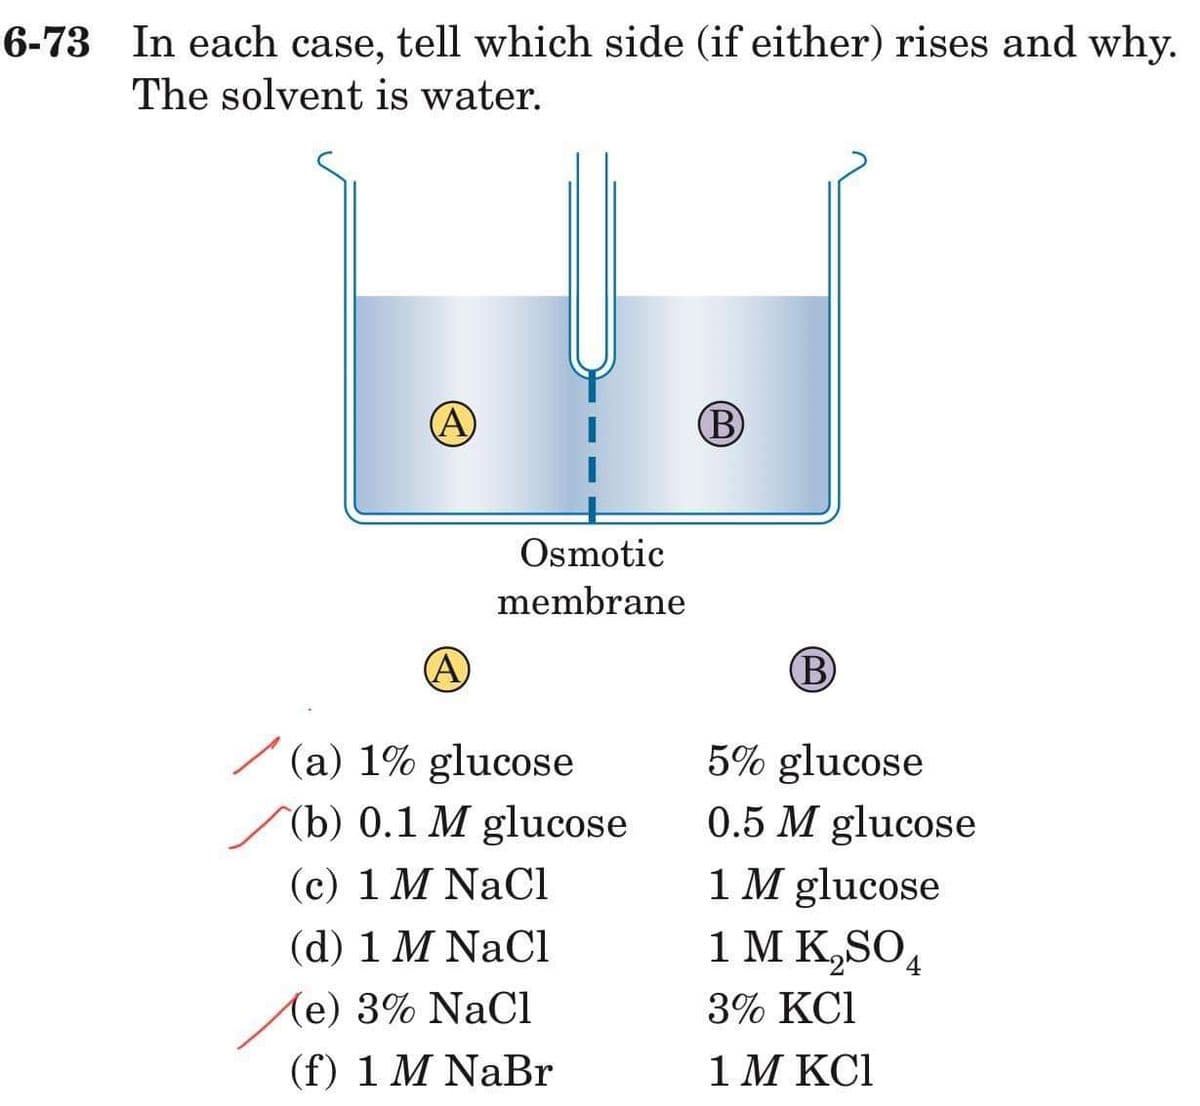 6-73 In each case, tell which side (if either) rises and why.
The solvent is water.
A
A
Osmotic
membrane
(a) 1% glucose
(b) 0.1 M glucose
(c) 1 M NaCl
(d) 1 M NaCl
(e) 3% NaCl
(f) 1 M NaBr
(B)
B
5% glucose
0.5 M glucose
1 M glucose
1 M K₂SO4
3% KC1
1 M KC1